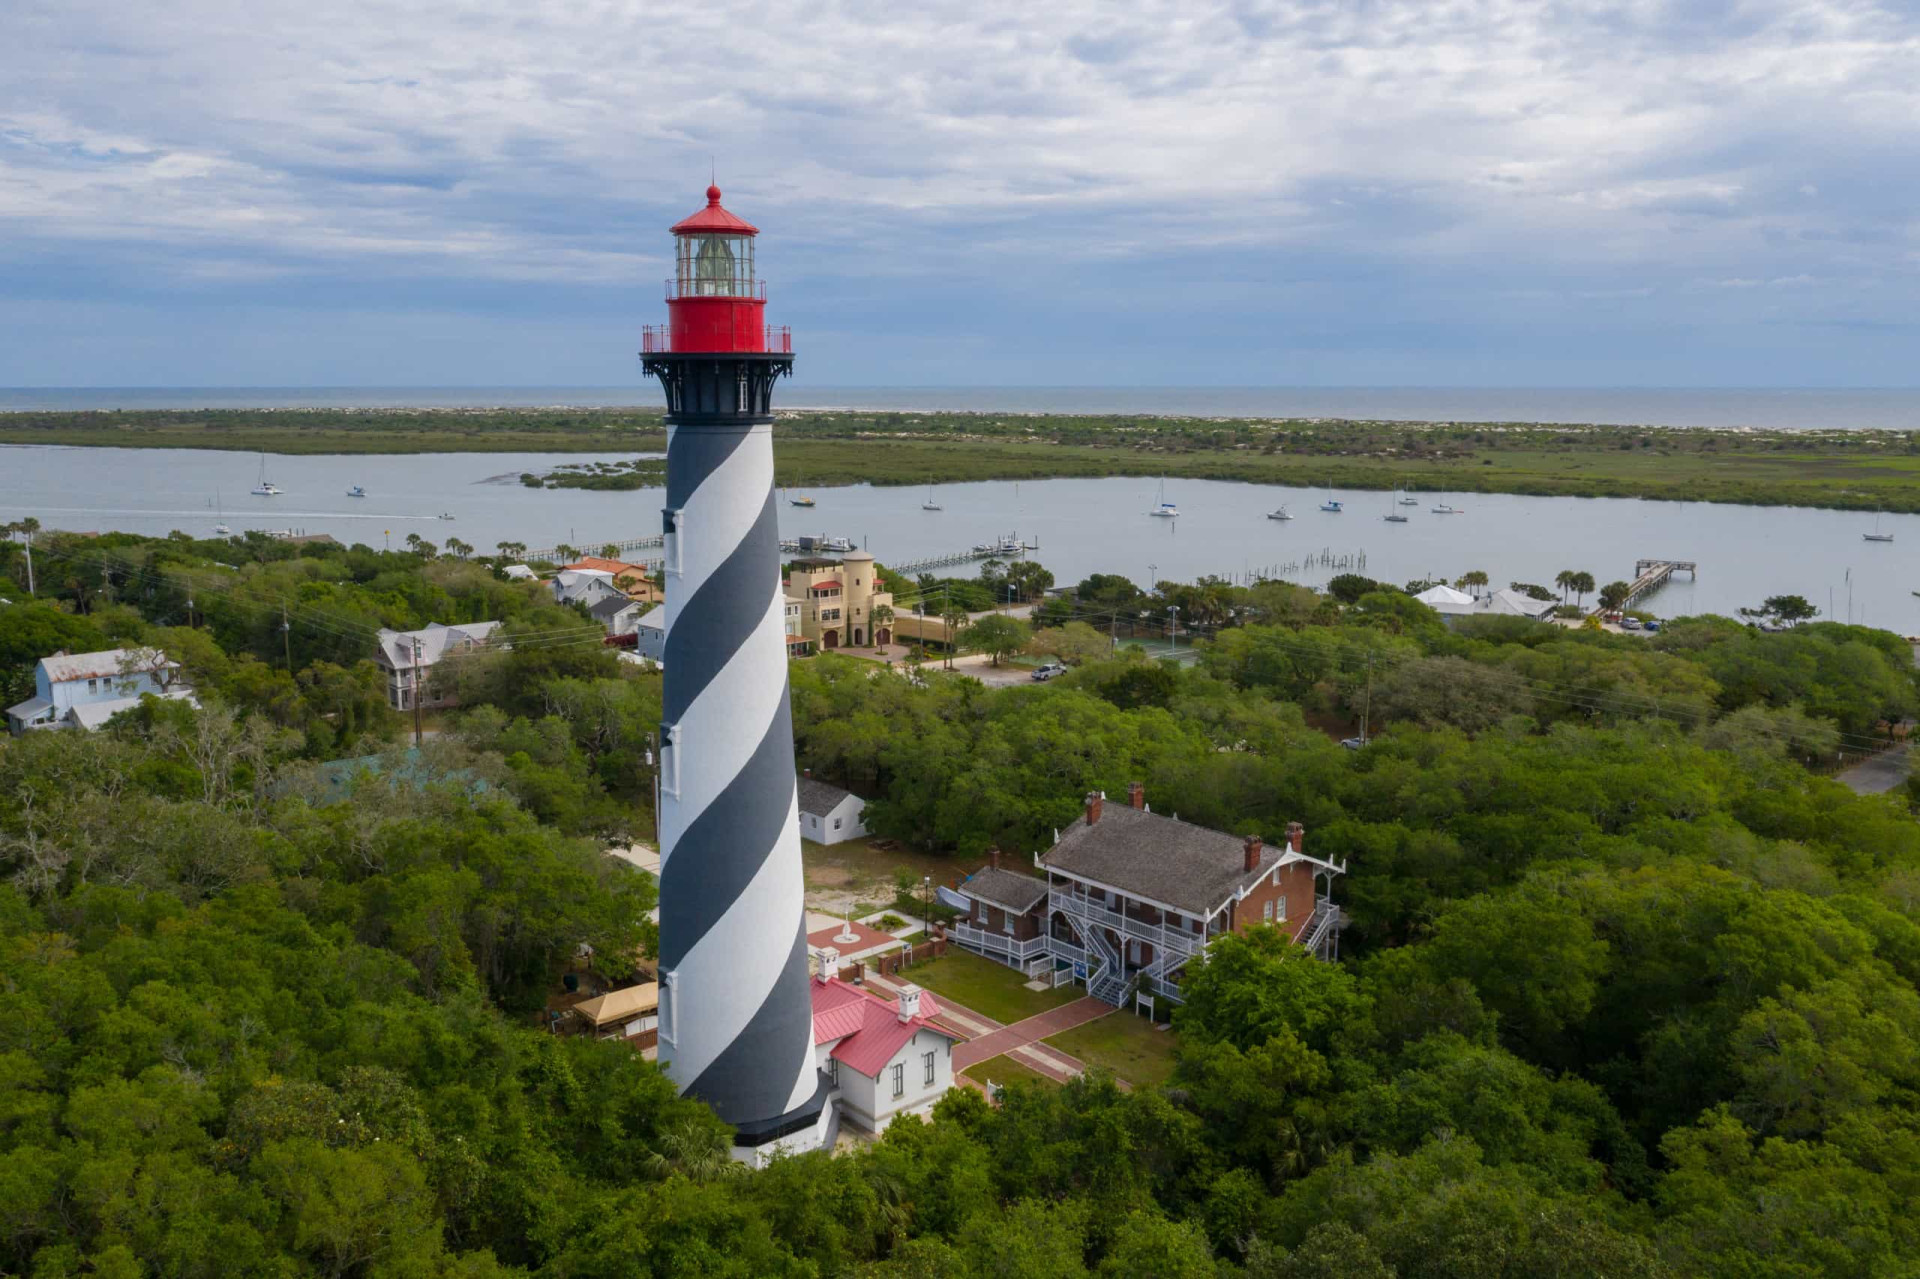 <p>St. Augustine Lighthouse is said to be haunted by the ghost of the children of Hezekiah Pittee, who was the man responsible for rebuilding the lighthouse. The children drowned in the area. The "Man in Blue," who is supposedly the ghost of a lighthouse keeper, is also responsible for haunting the place, among other spirits.</p>